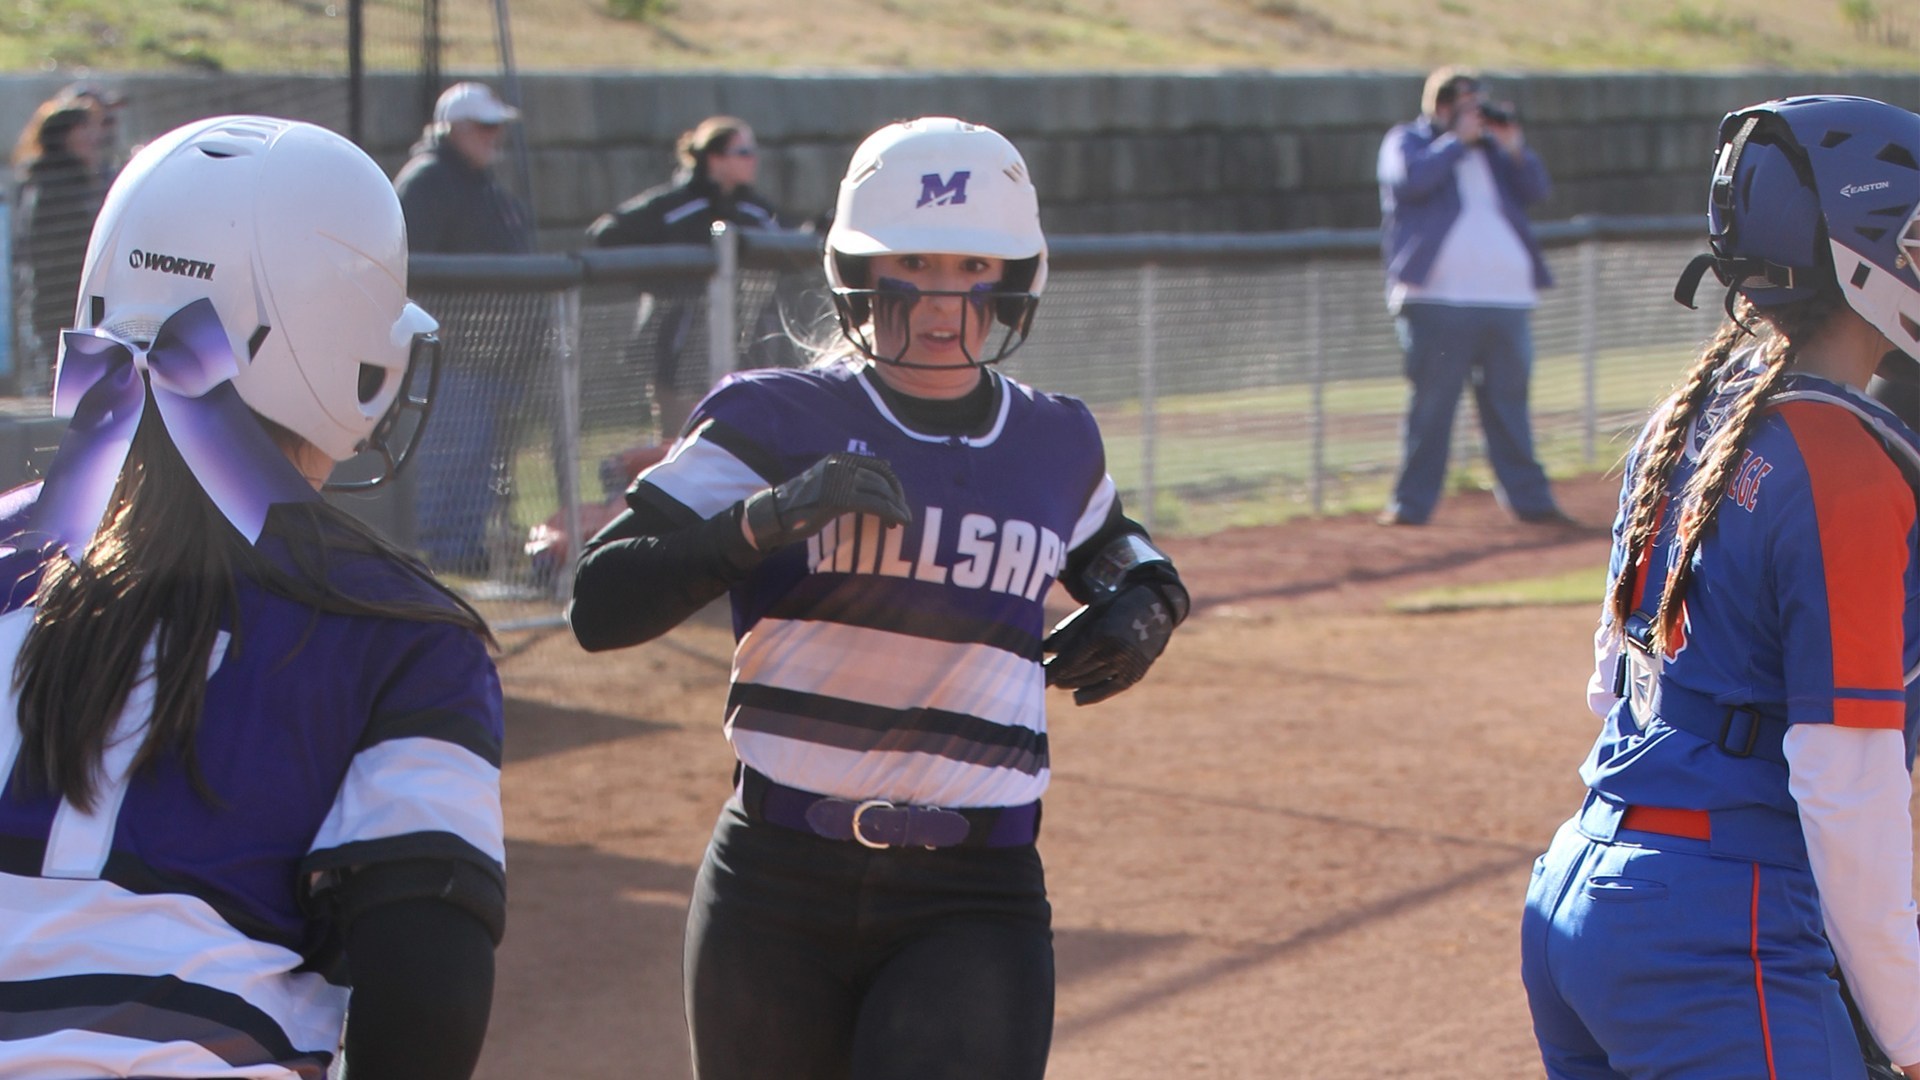 Read more about the article Millsaps Softball Season off to Solid Start